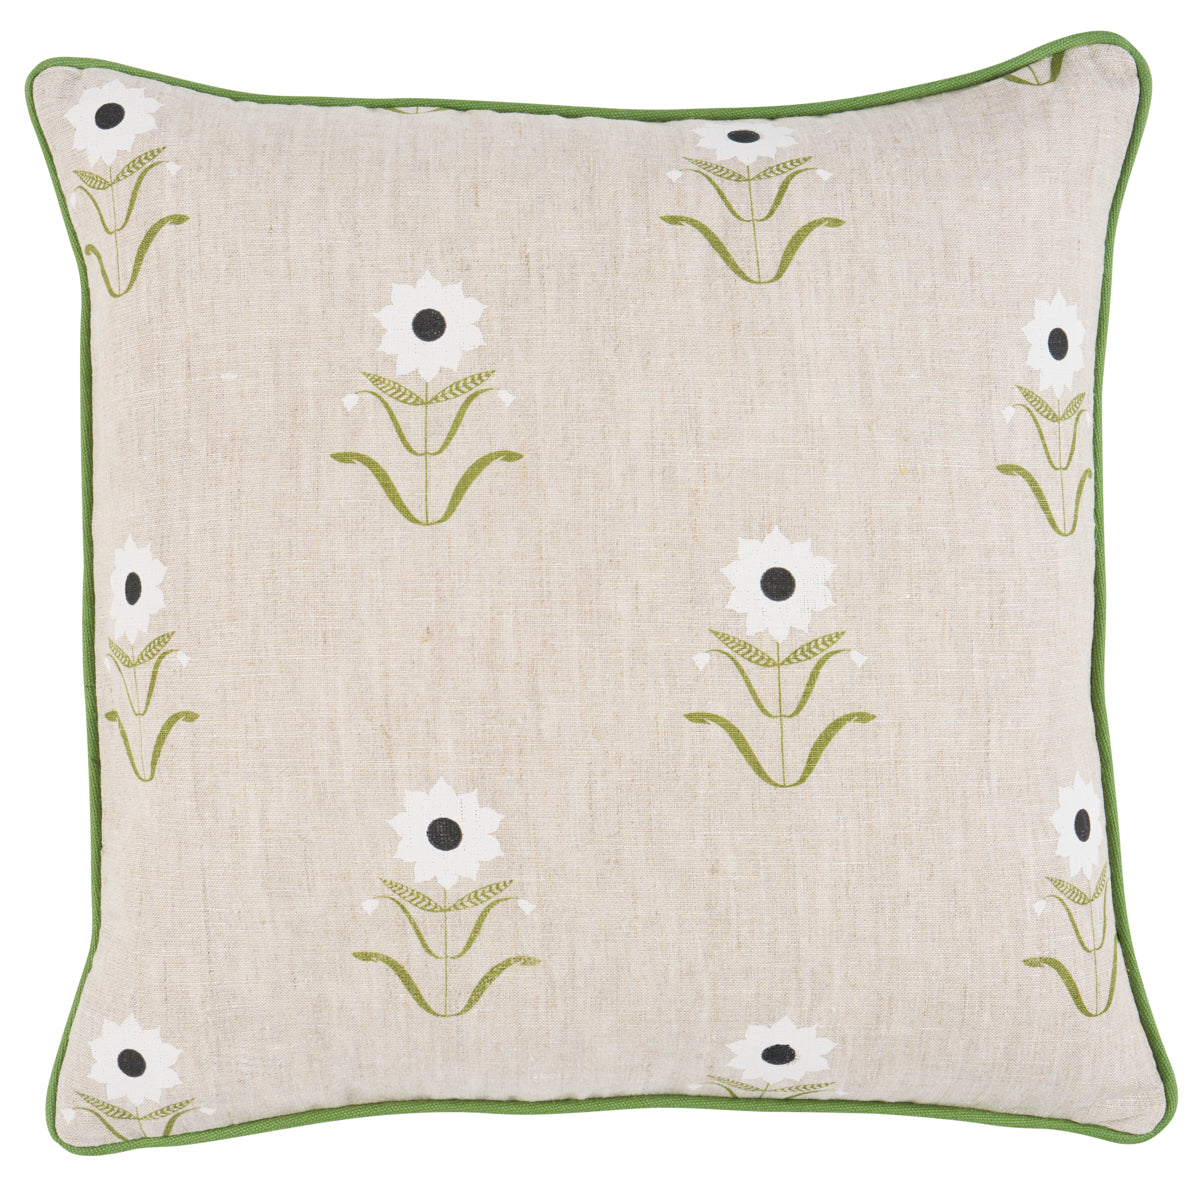 Purchase So18198103 | Forget Me Nots Pillow, White On Linen - Schumacher Pillows